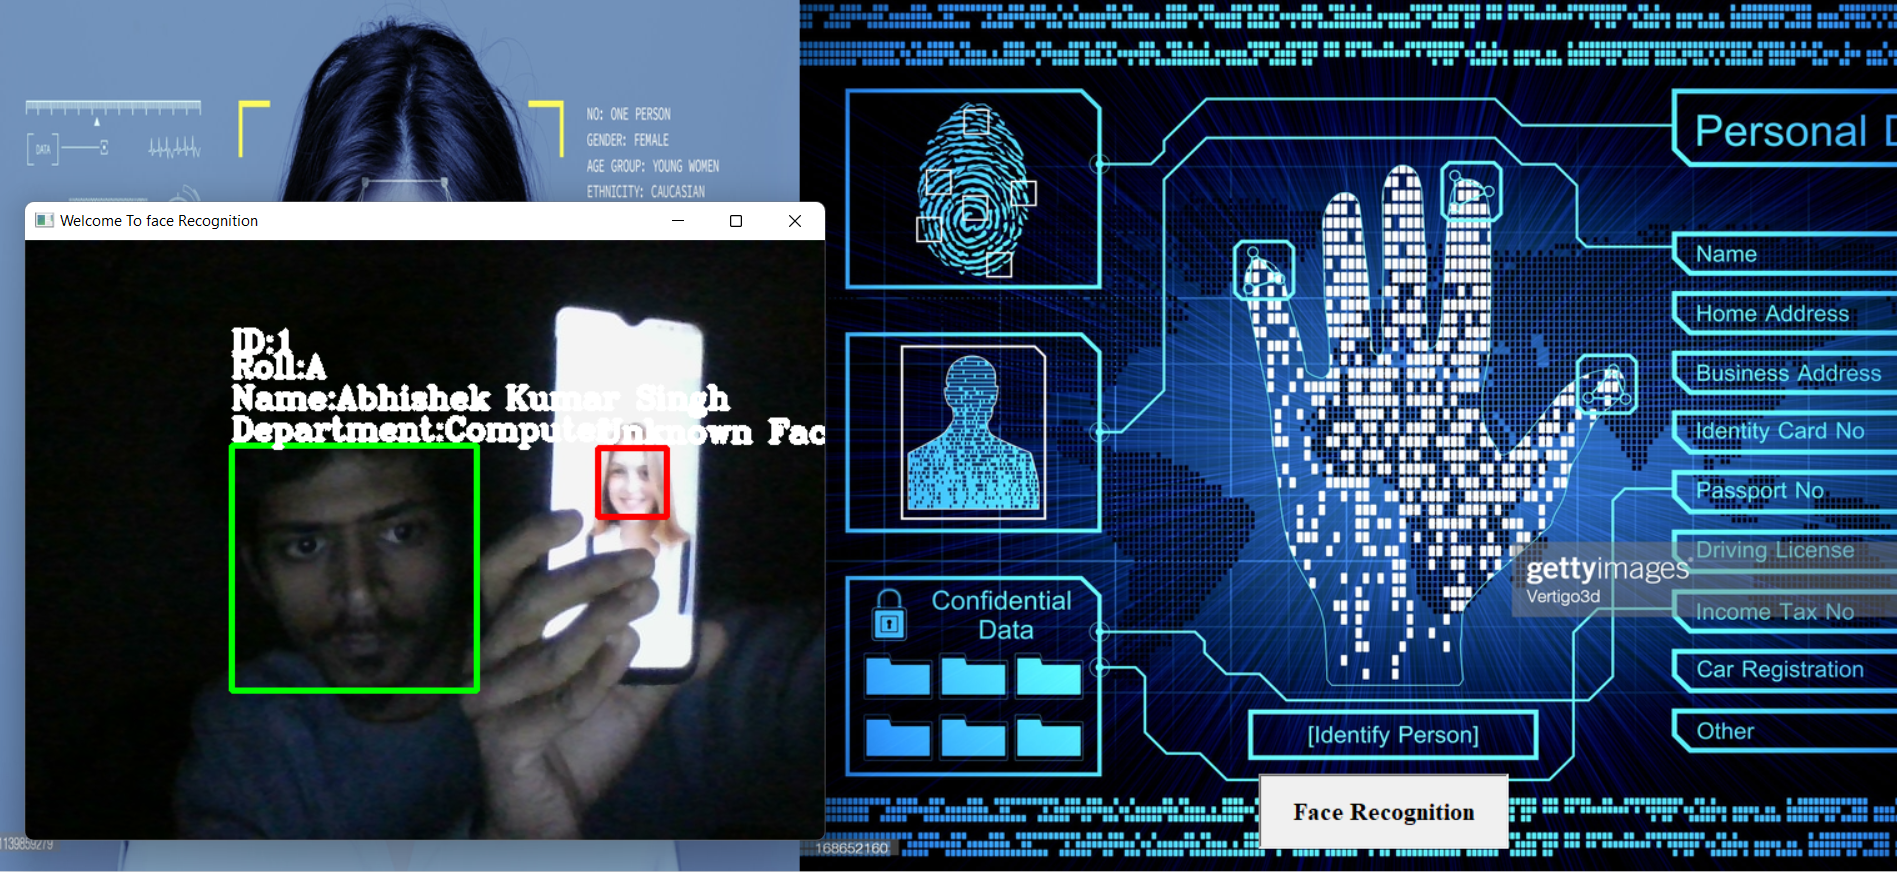 Facial recognition and identification